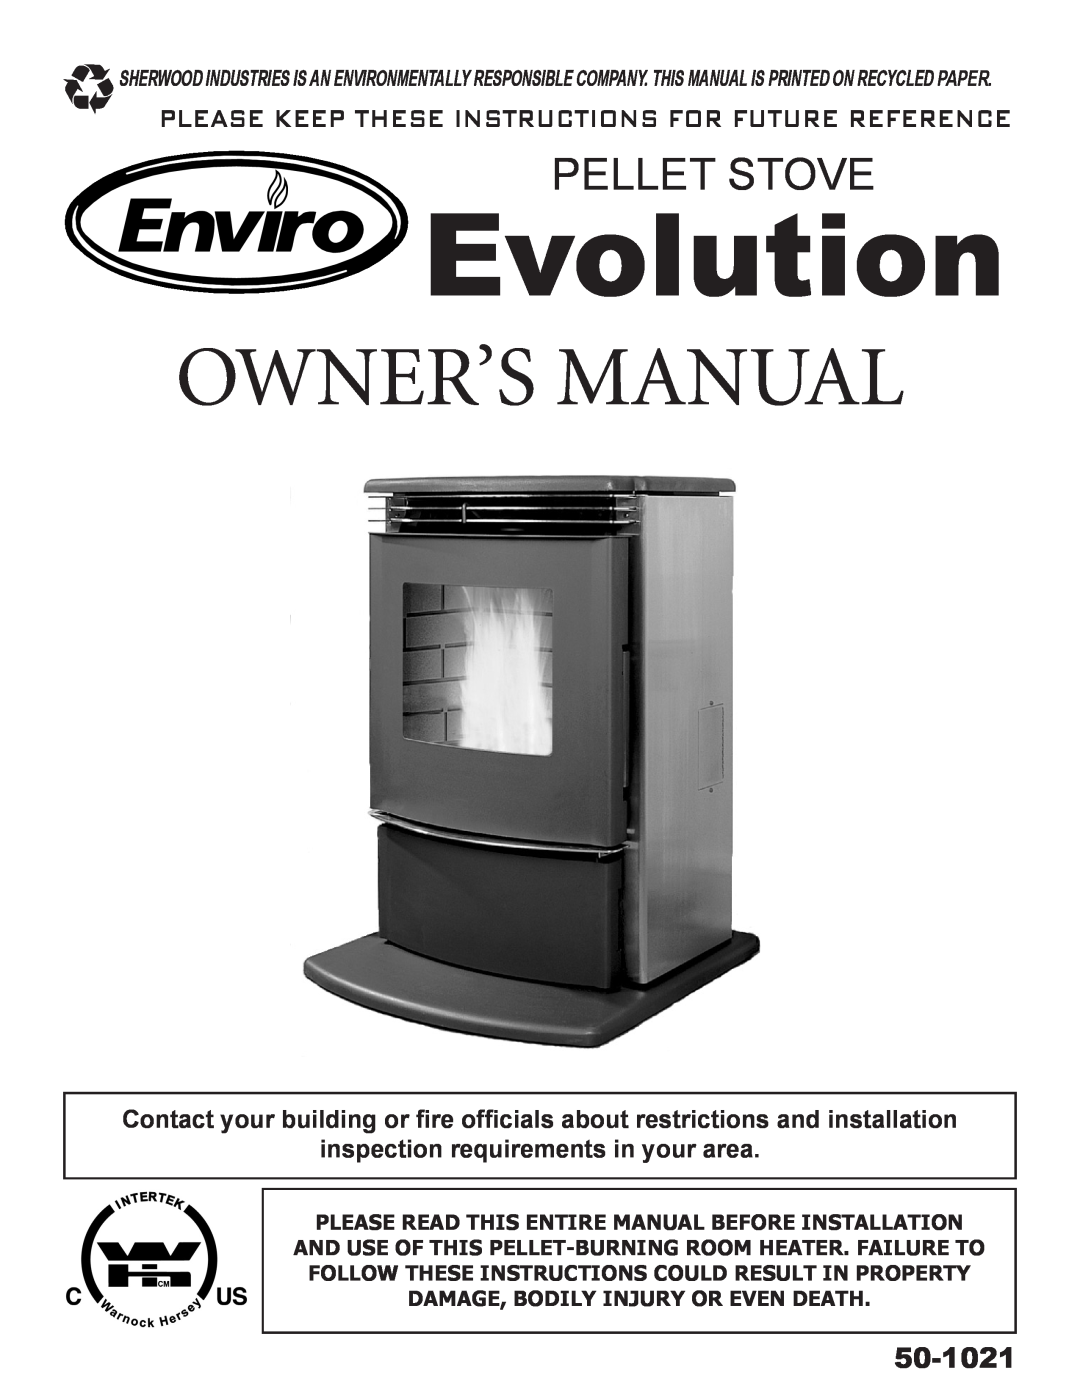 Enviro C-11023 owner manual 50-1021, Please Read This Entire Manual Before Installation, Evolution, Pellet Stove 